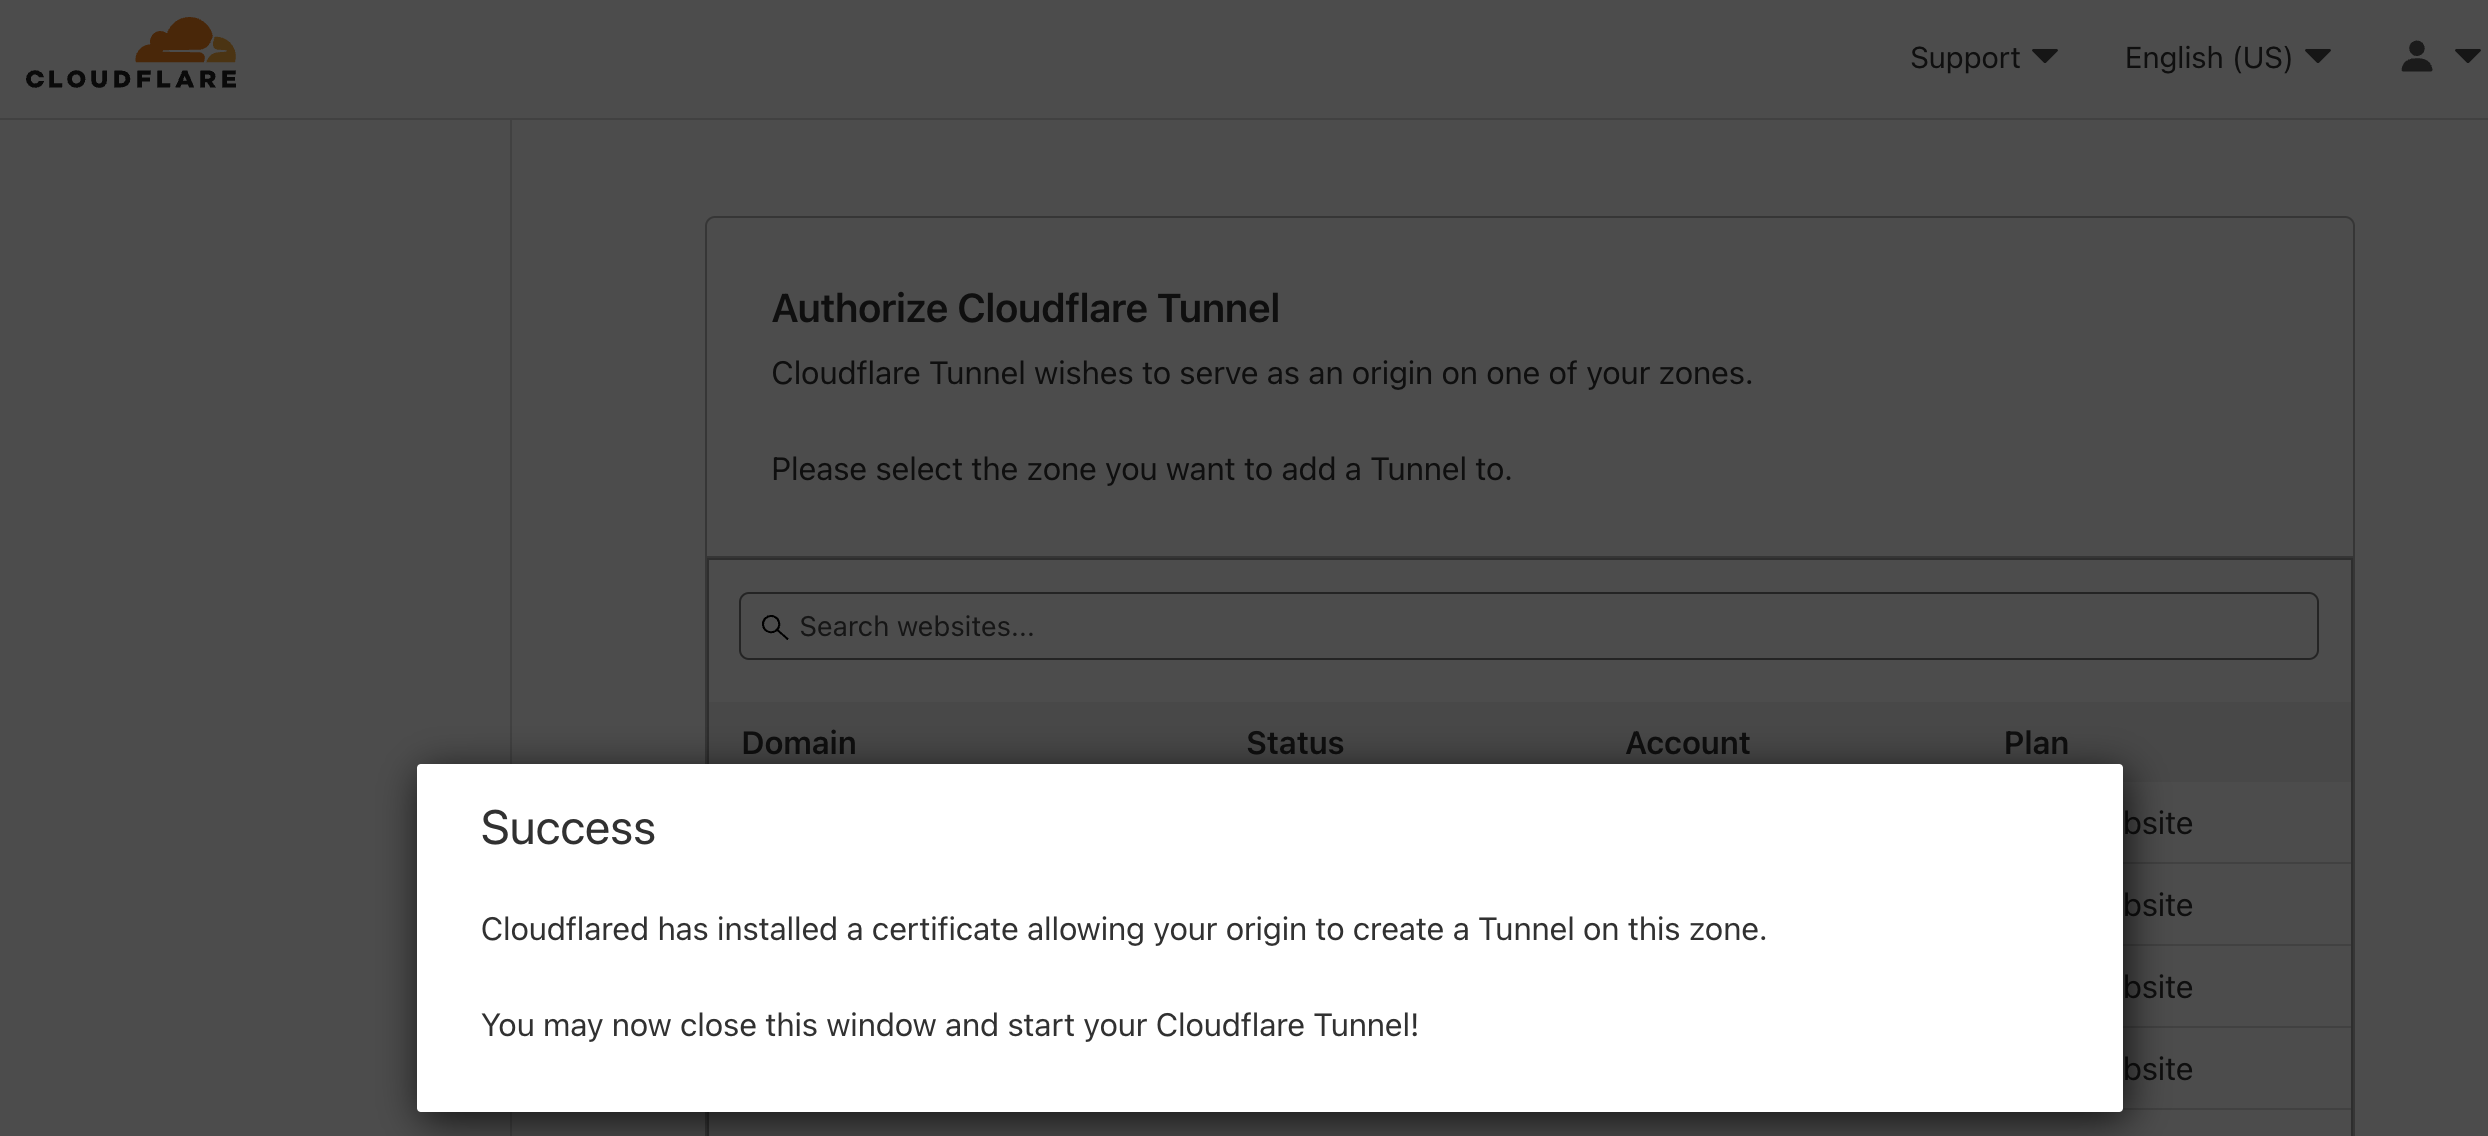 Authorize cloudflare to use a domain for the tunnels